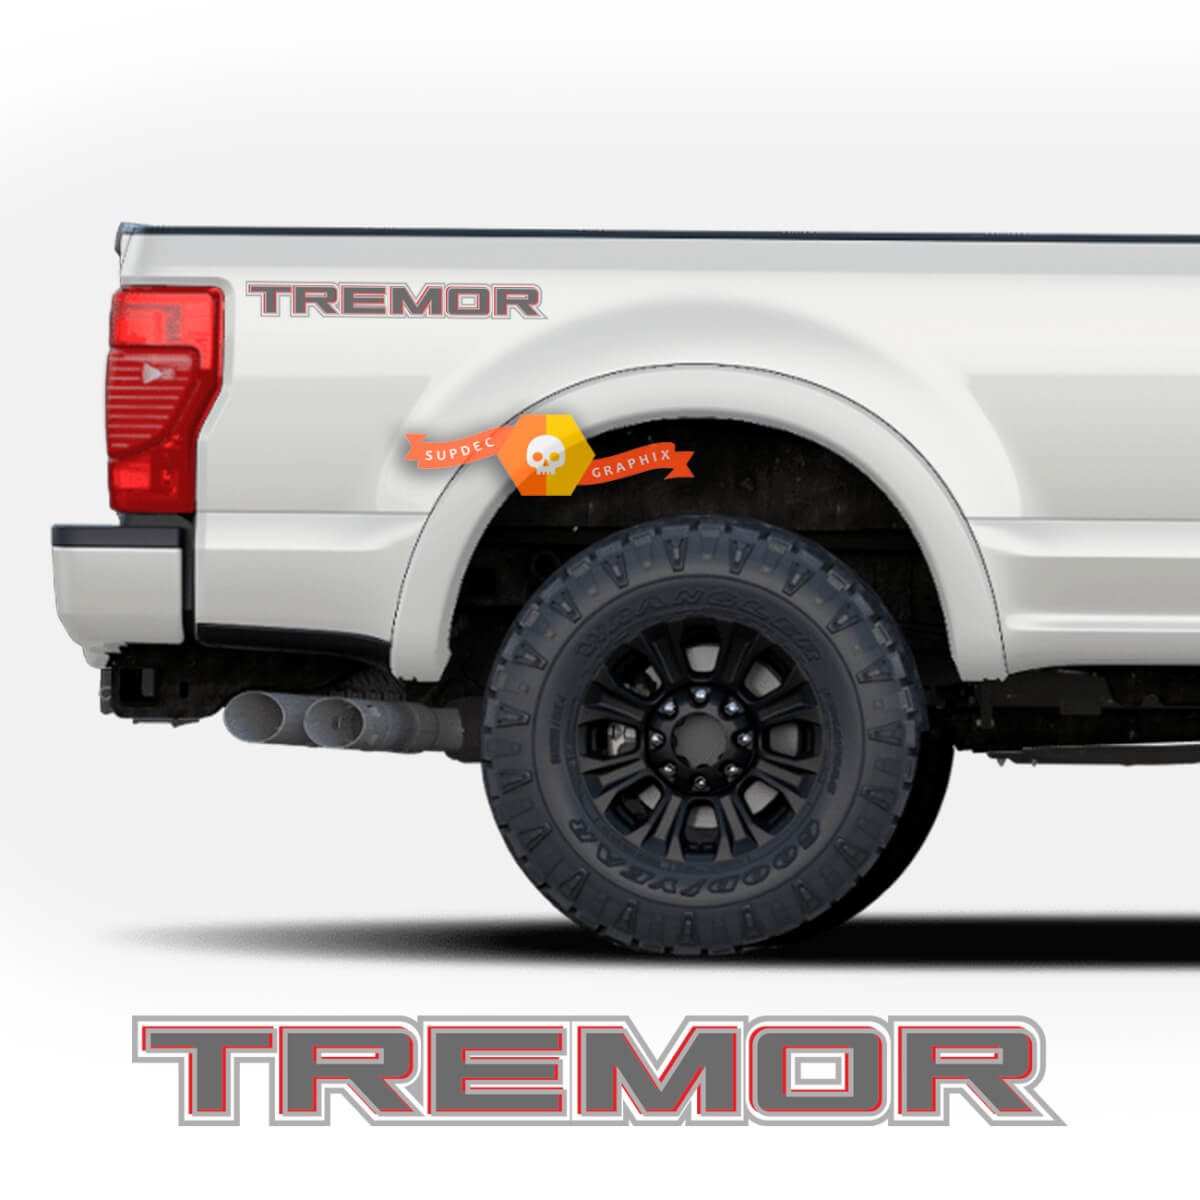 Pair Truck Bed Decal Tremor Set Ford Super Duty F250 F150 Vinyl Stickers like on the picture
